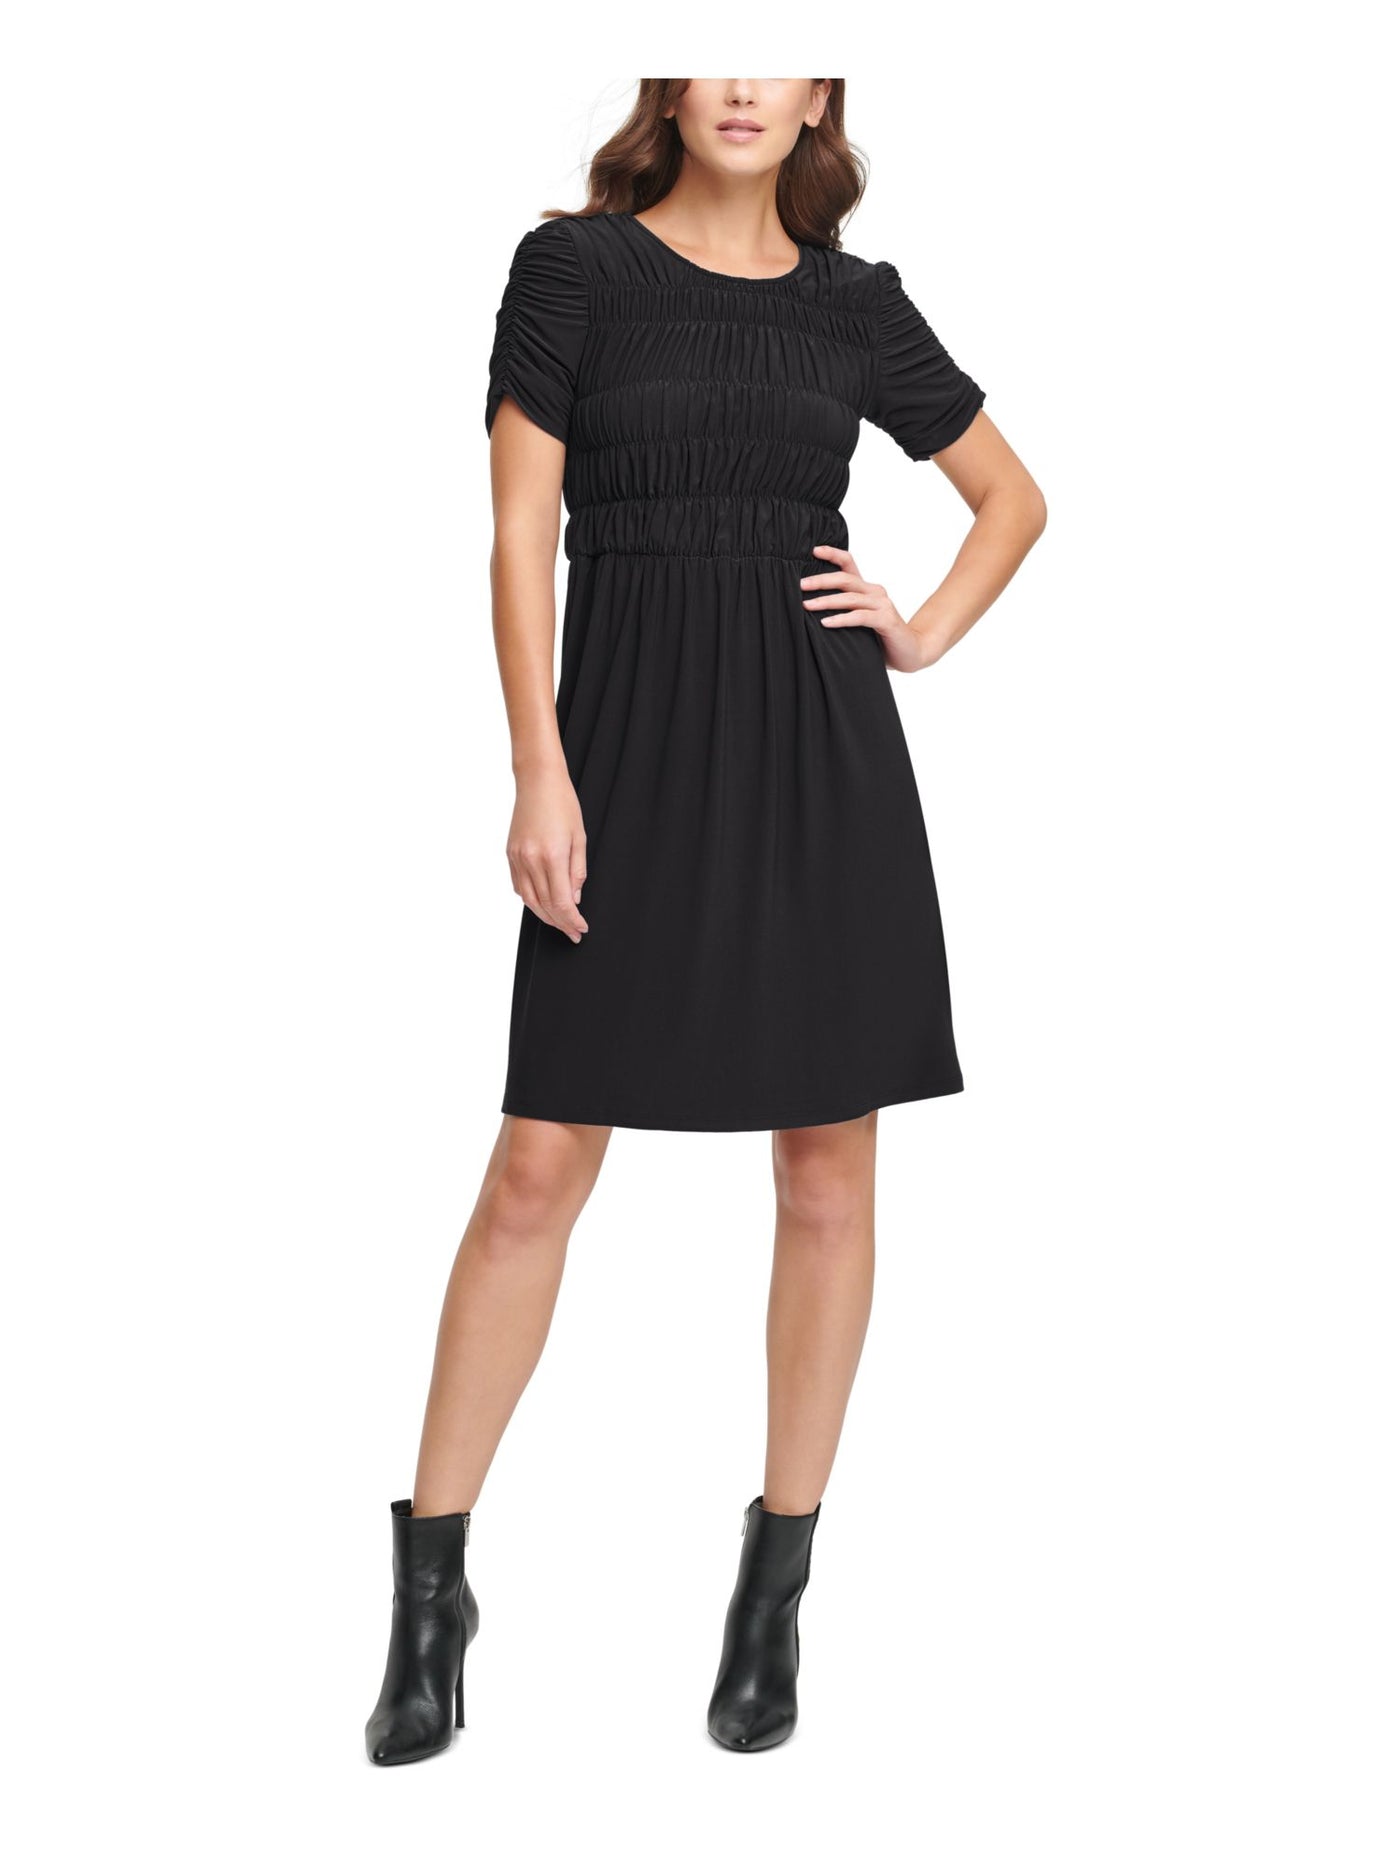 DKNY Womens Black Ruched Gathered Zippered Short Sleeve Jewel Neck Above The Knee Fit + Flare Dress XS